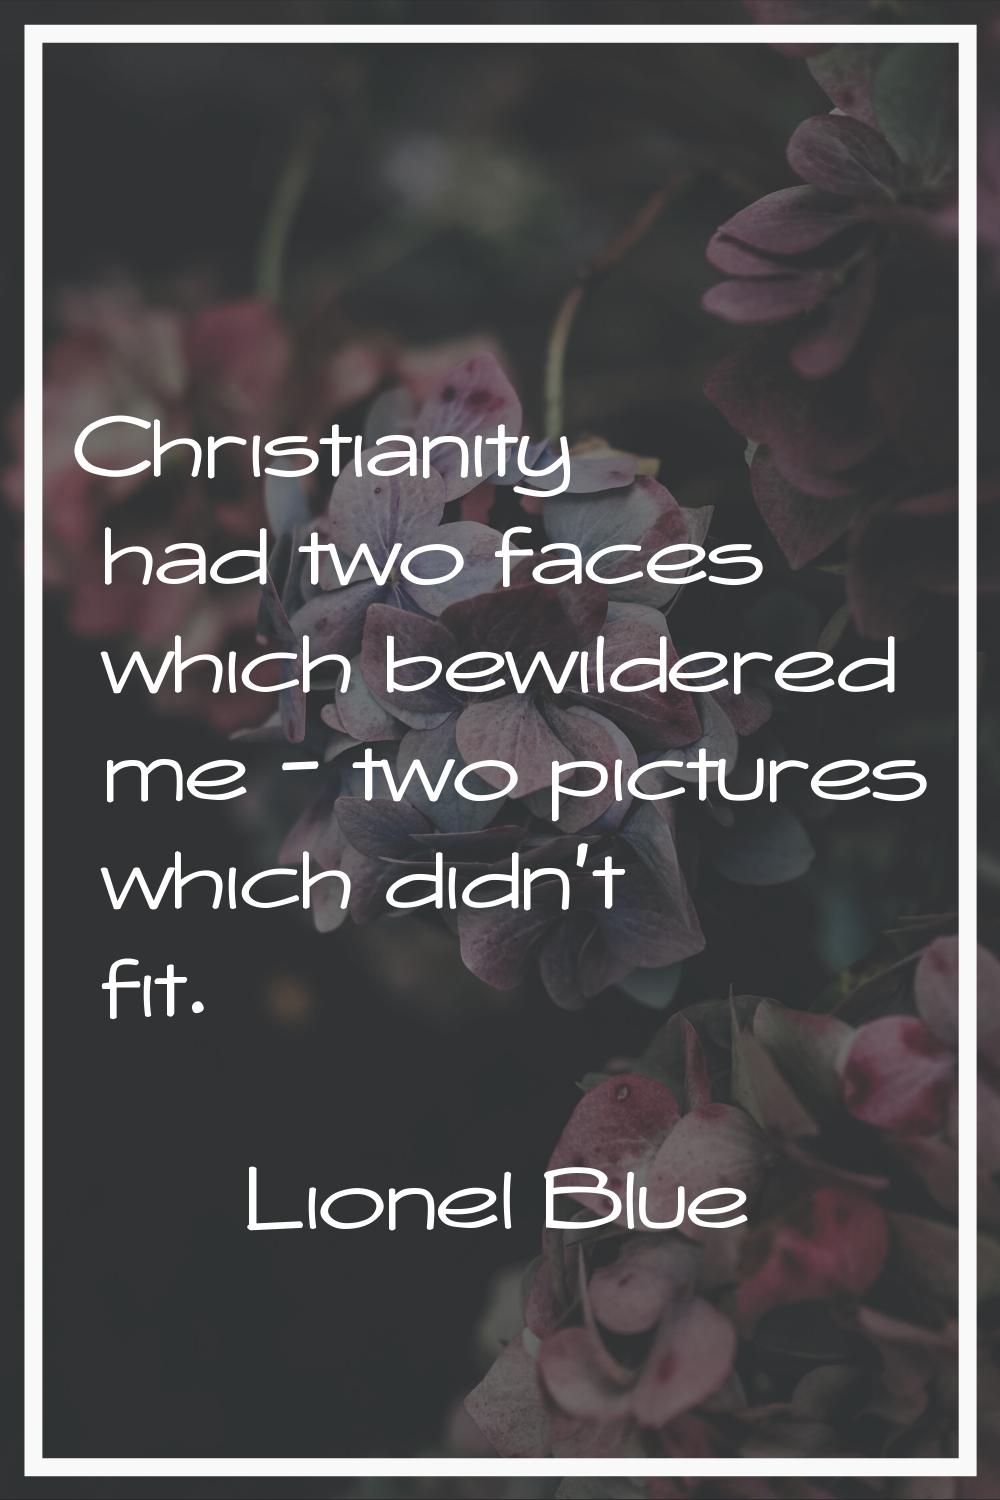 Christianity had two faces which bewildered me - two pictures which didn't fit.